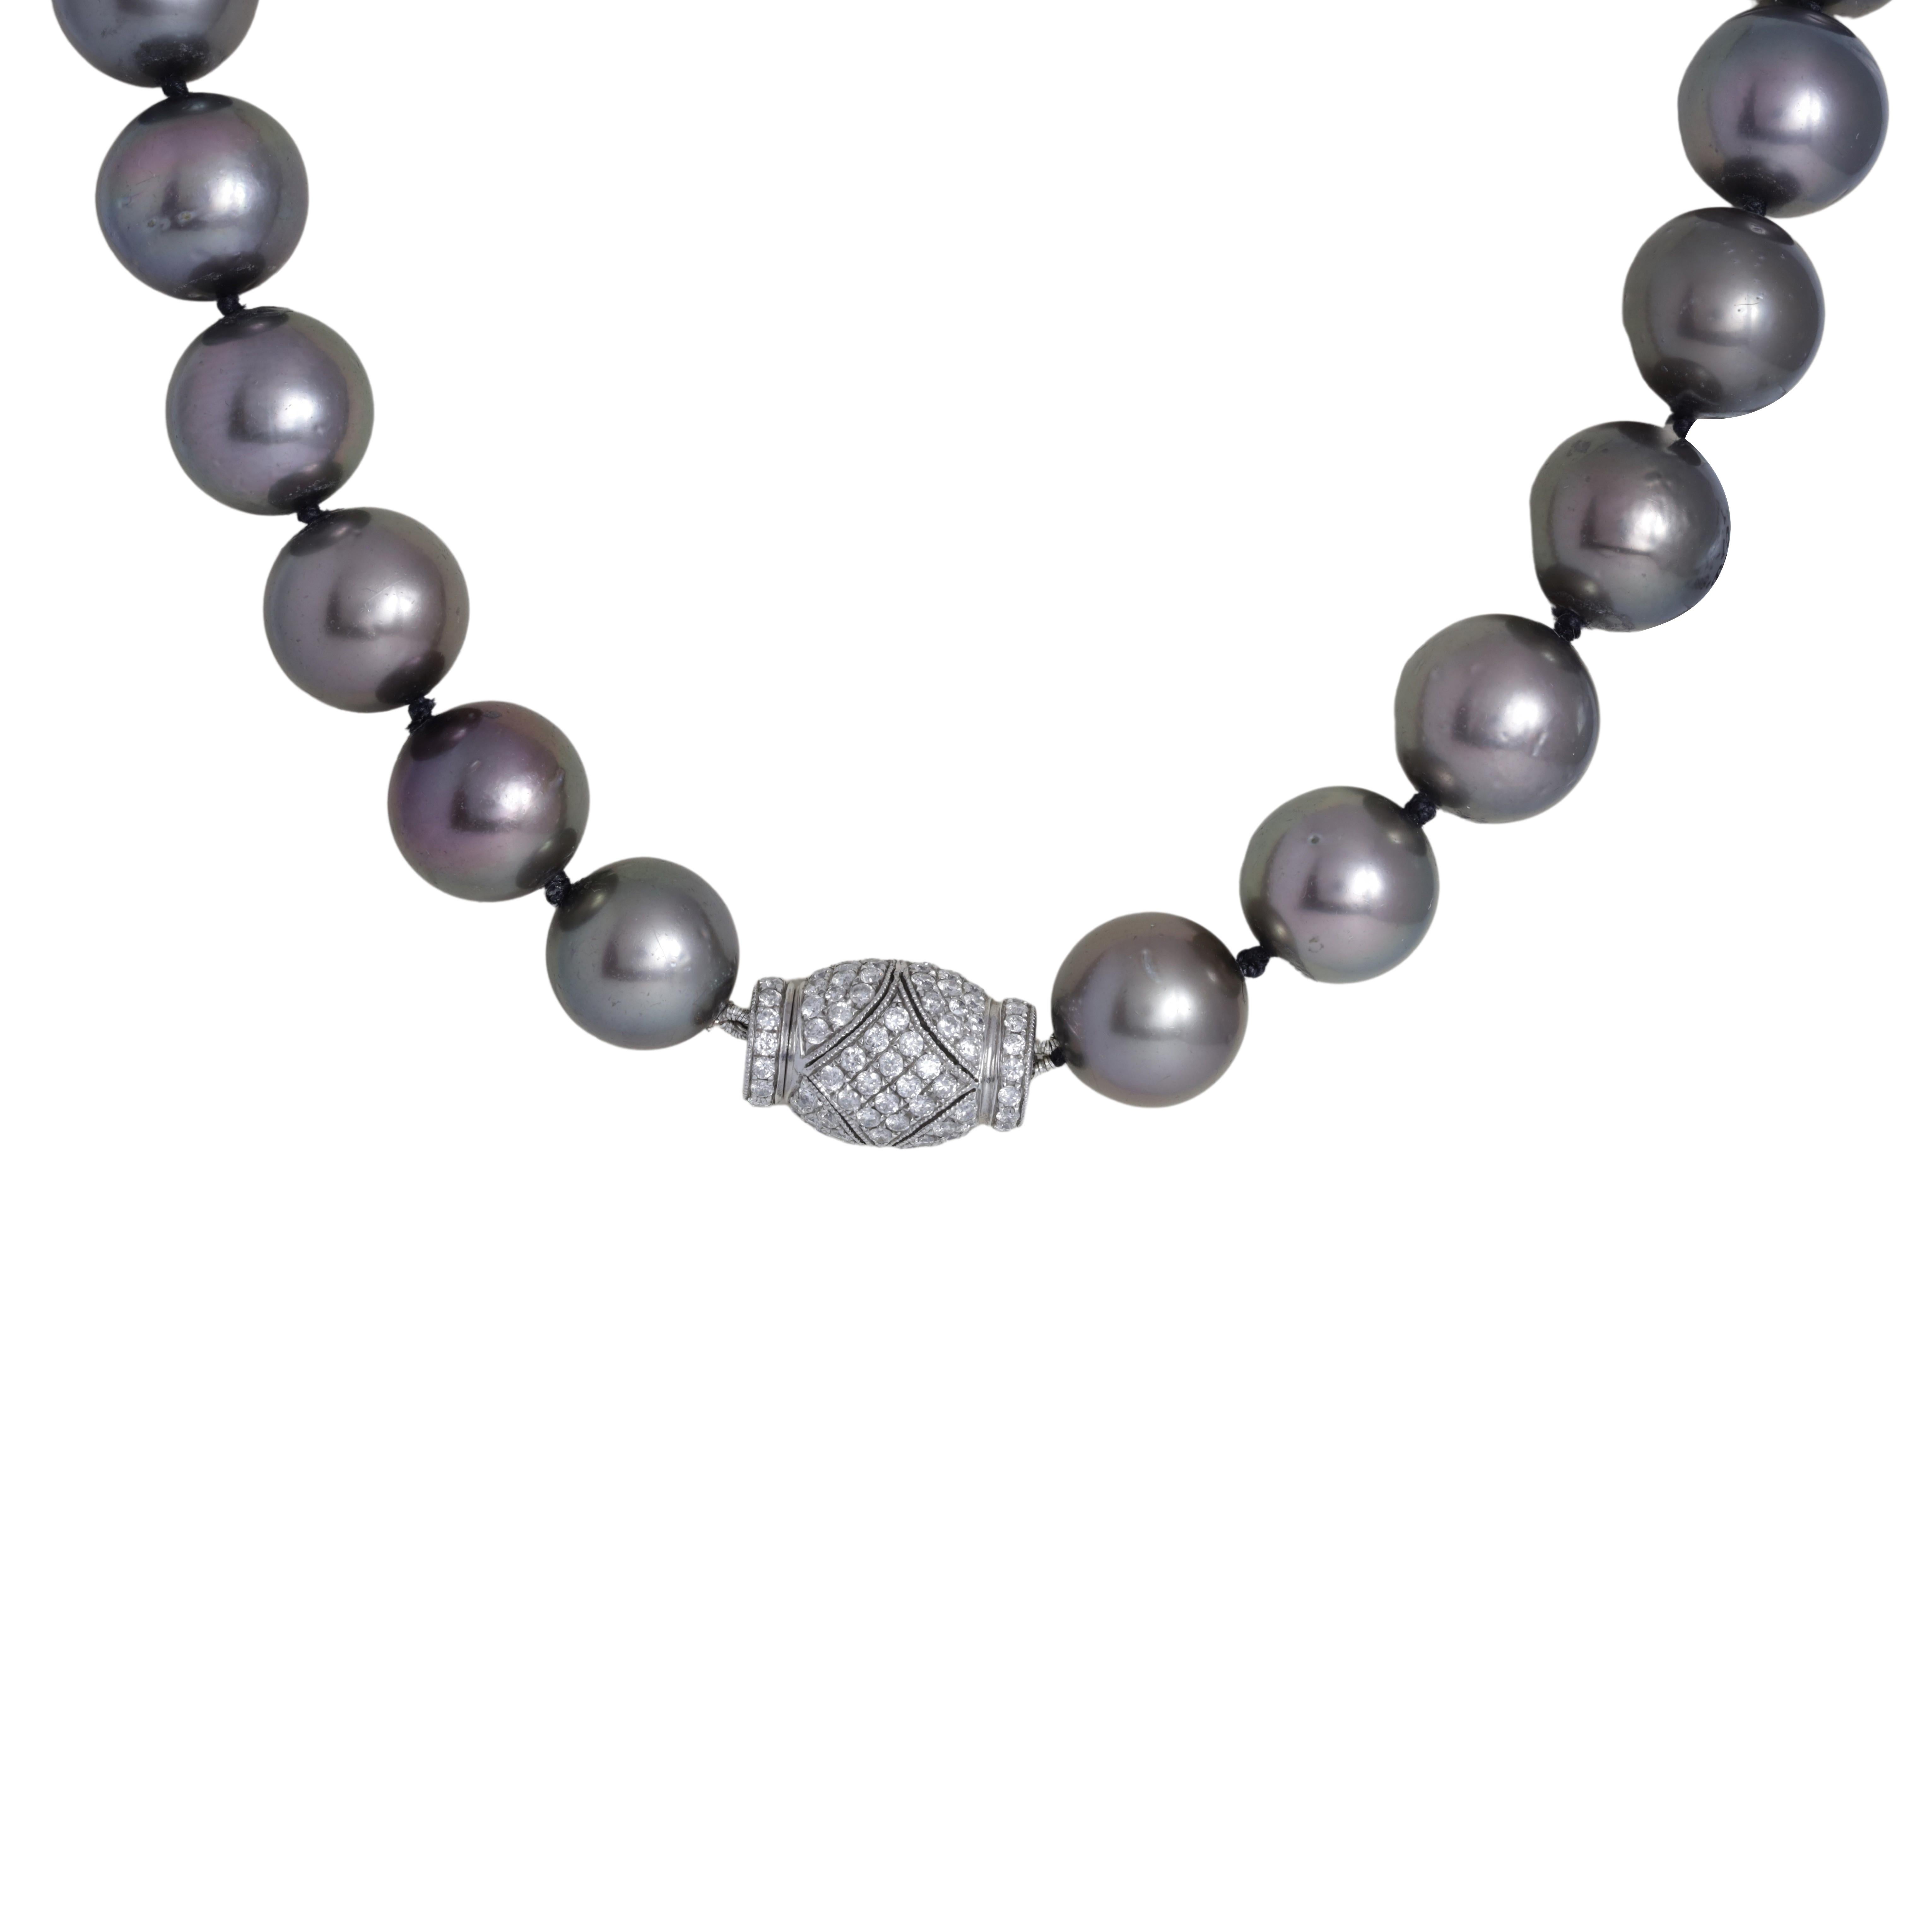 Modern Diana M. Diamond pearl necklace adorned with 11-14 mm Tahitian south sea pearls For Sale